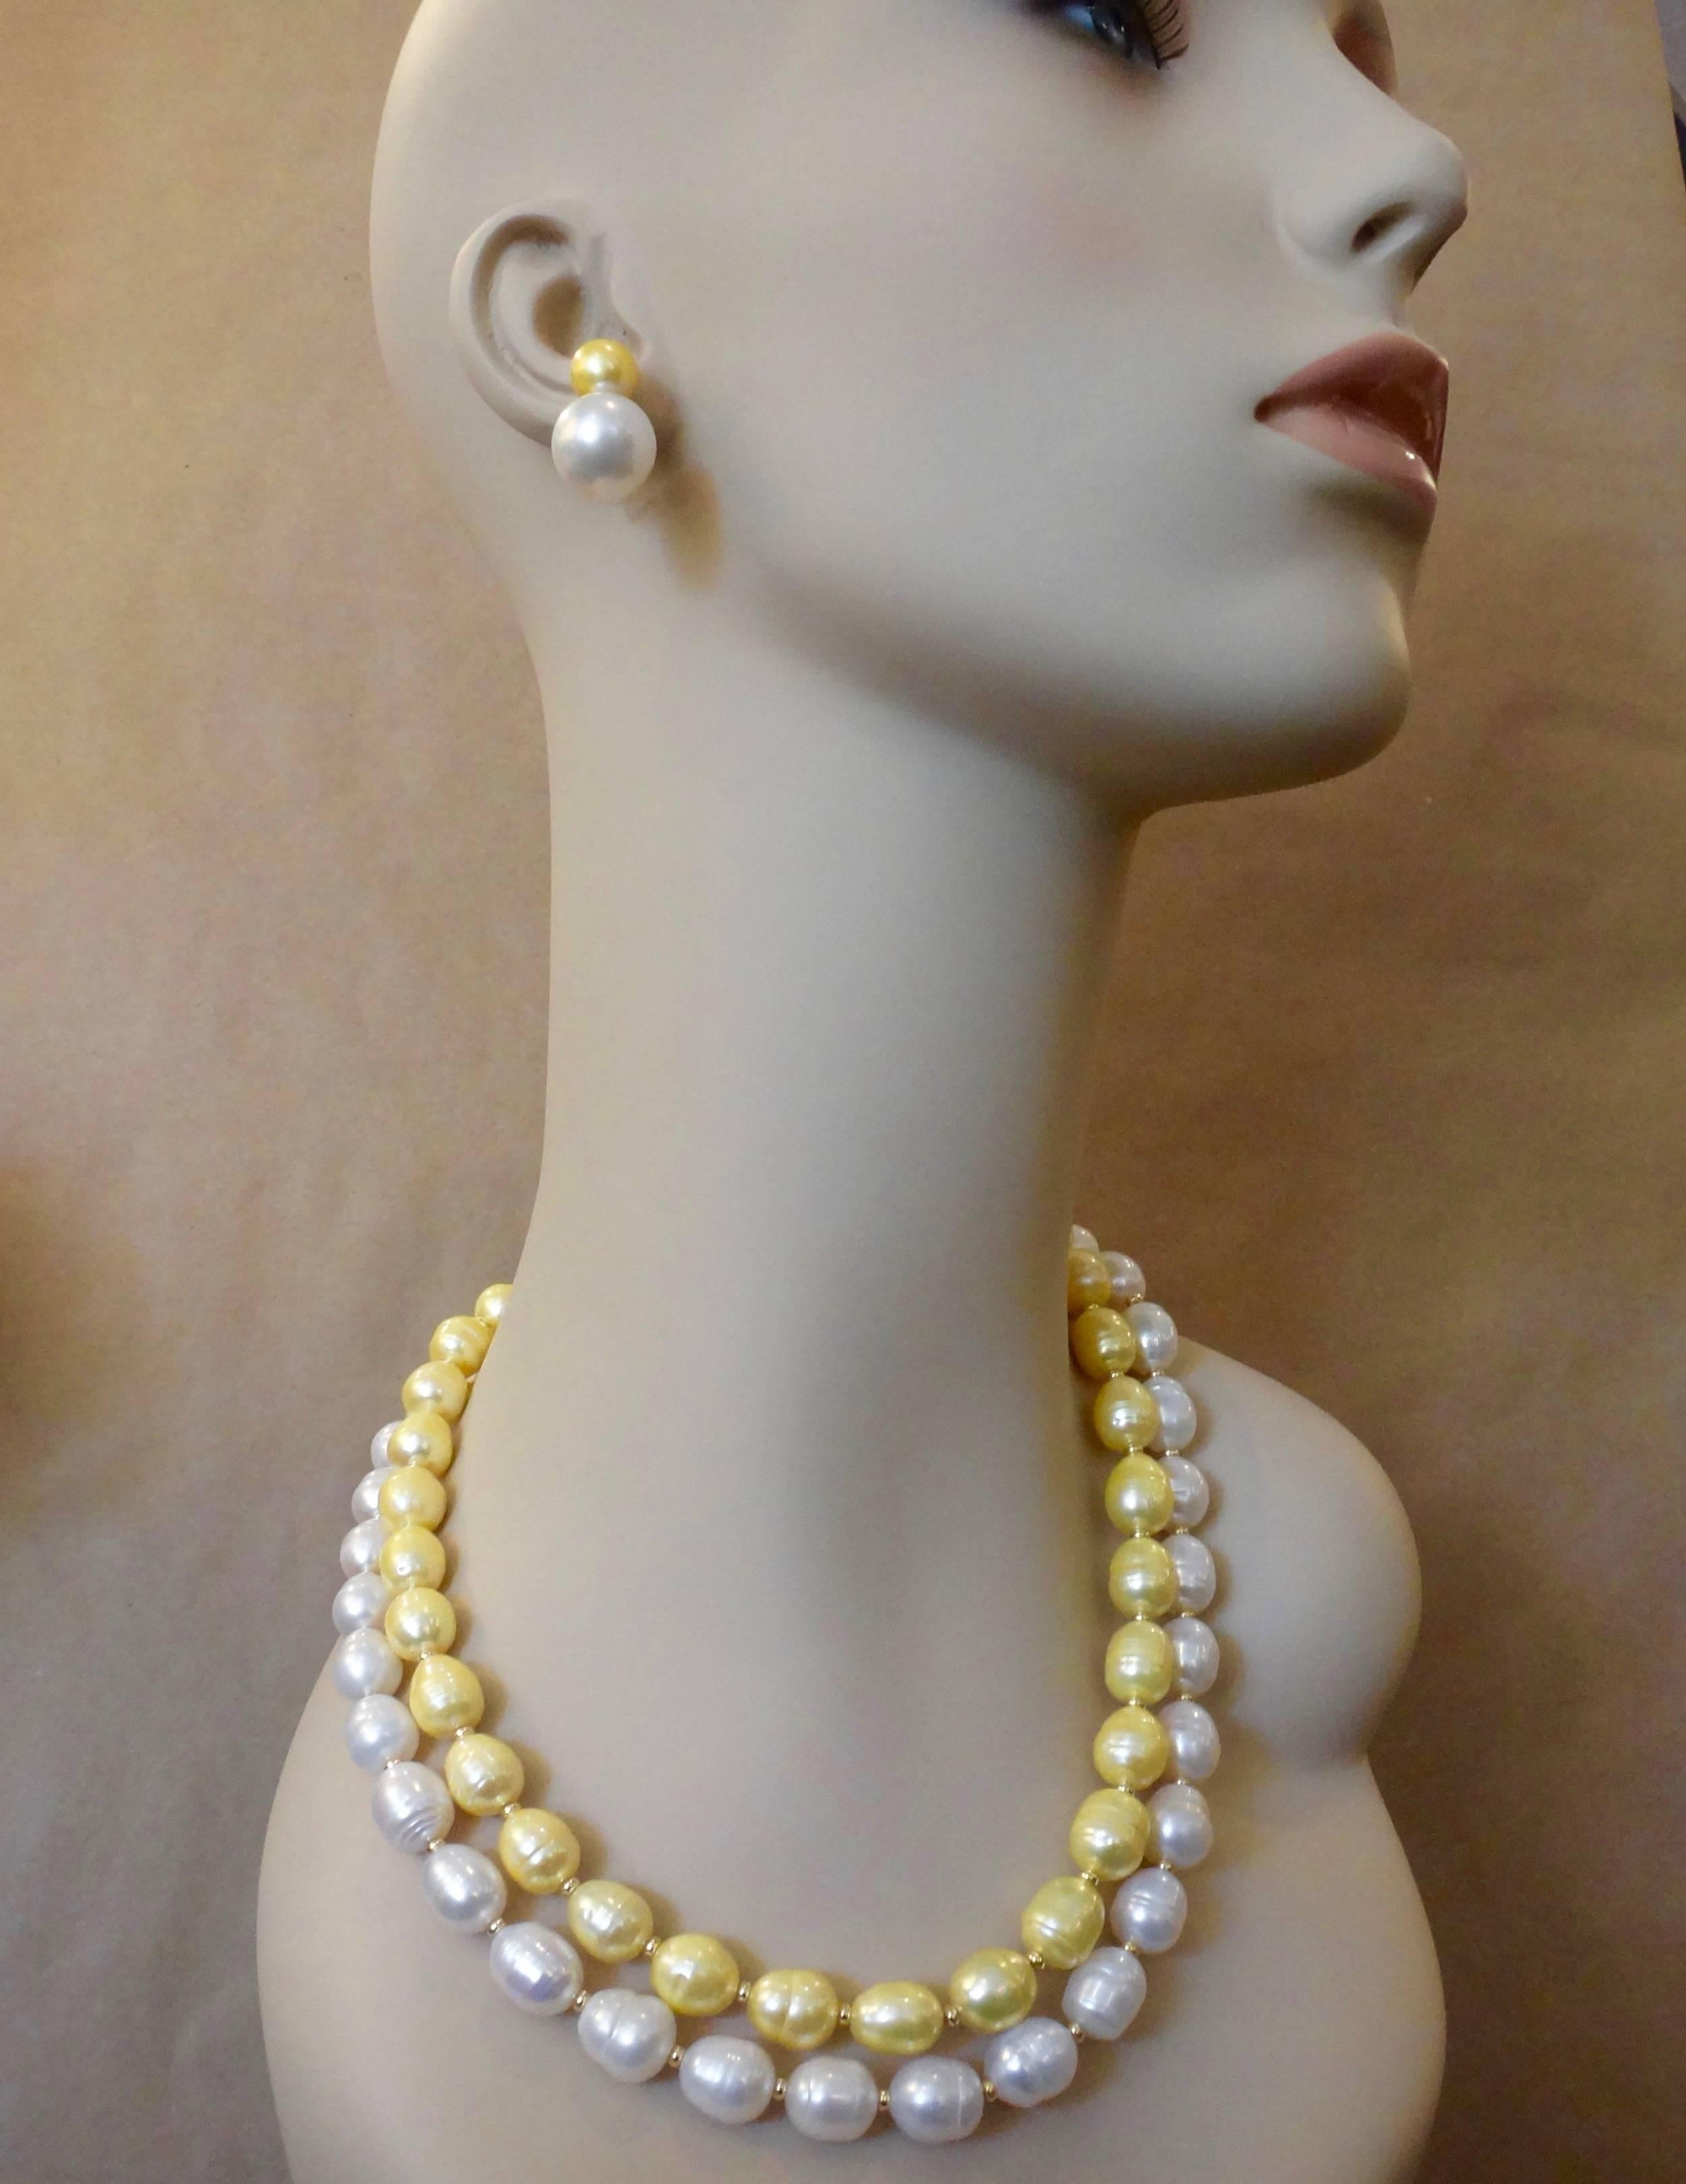 Two strands of perfectly conformed baroque circle pearls shape this daring and impressive necklace.  The outer strand of pearls are bright white.  The inner strand of pearls are in lovely shades of gold.  Both have great luster.  The strands are